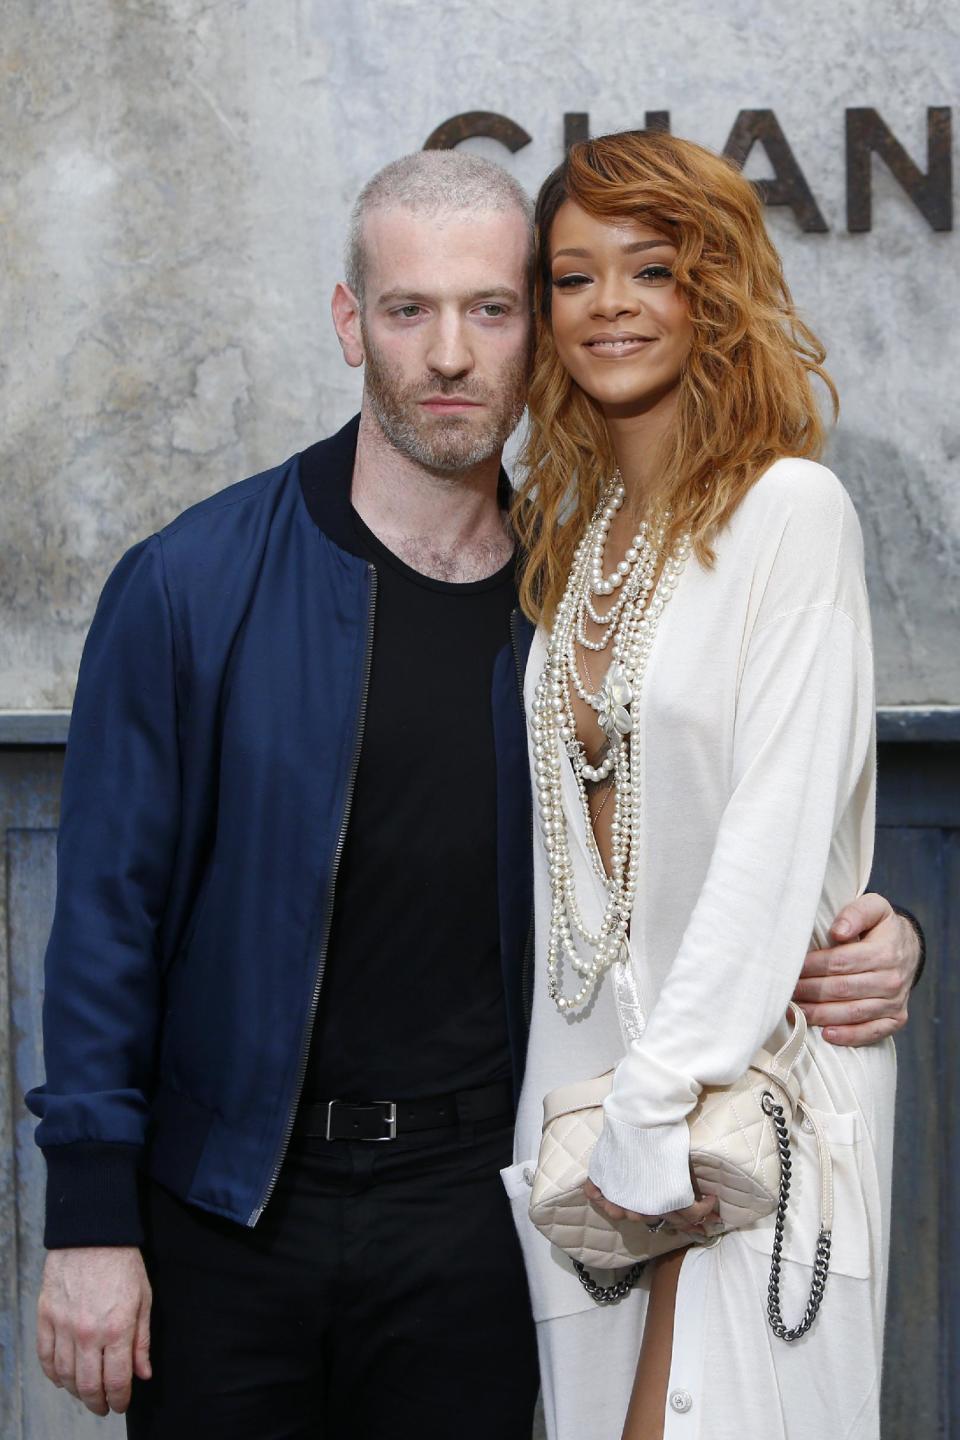 Singer Rihanna, right, and Mel Ottenberg pose for photographers as they arrive to attend Chanel's Haute Couture Fall-Winter 2013-2014 collection, presented Tuesday, July 2, 2013 in Paris. (AP Photo/Francois Mori)